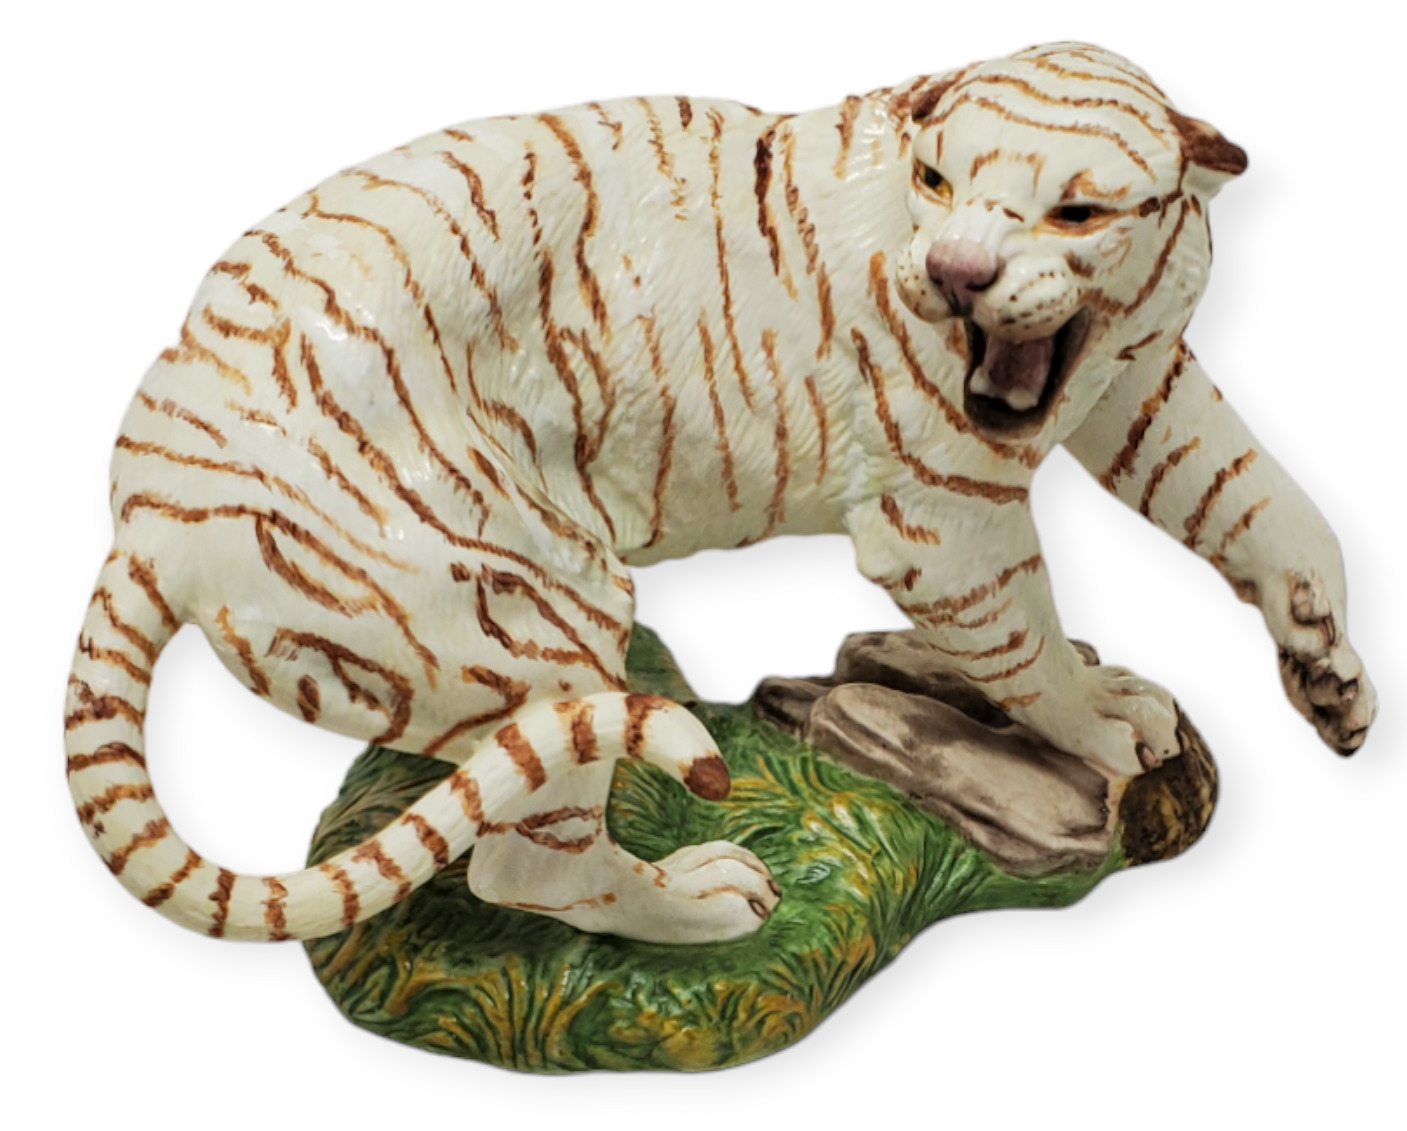 Franklin Mint - Great Cats of the World NWF - White Bengal Tiger Figurine 1989